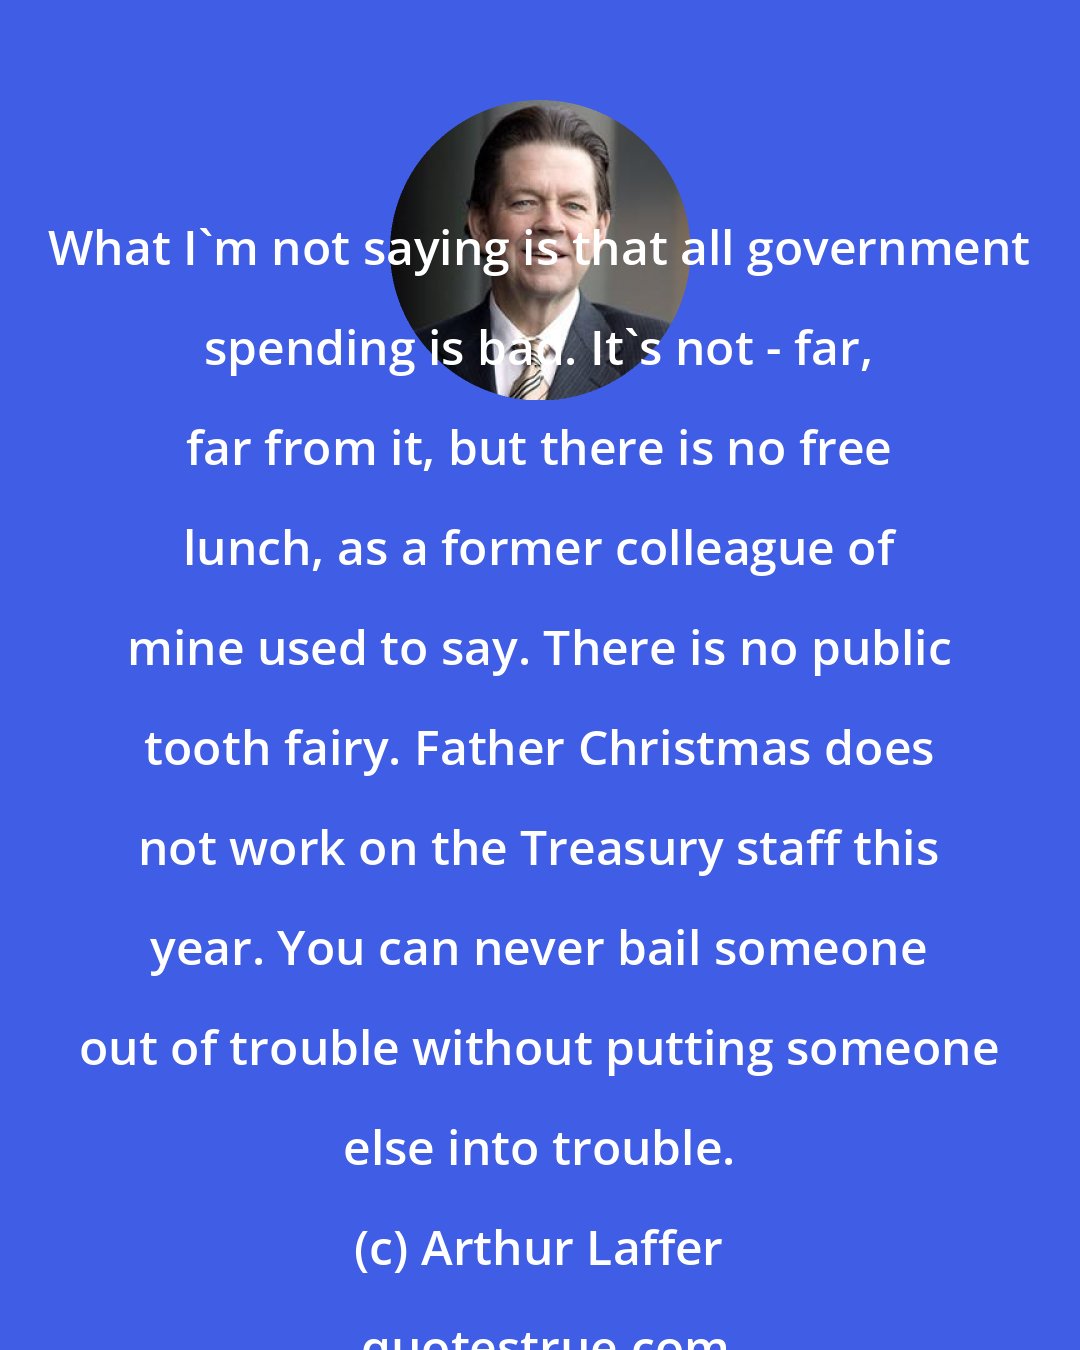 Arthur Laffer: What I'm not saying is that all government spending is bad. It's not - far, far from it, but there is no free lunch, as a former colleague of mine used to say. There is no public tooth fairy. Father Christmas does not work on the Treasury staff this year. You can never bail someone out of trouble without putting someone else into trouble.